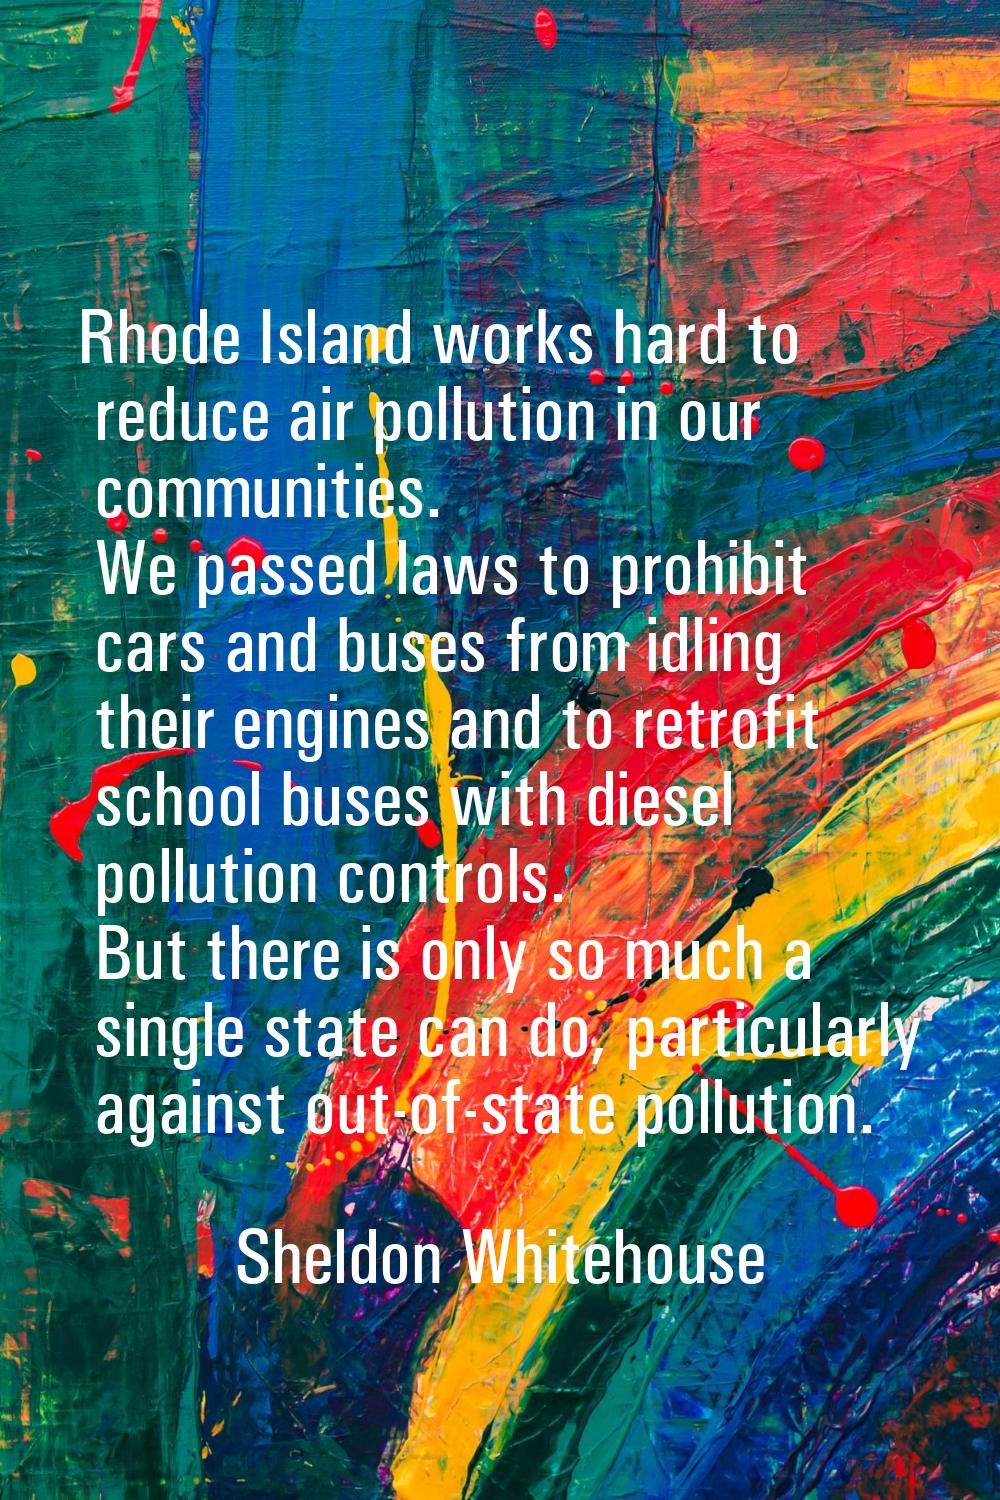 Rhode Island works hard to reduce air pollution in our communities. We passed laws to prohibit cars